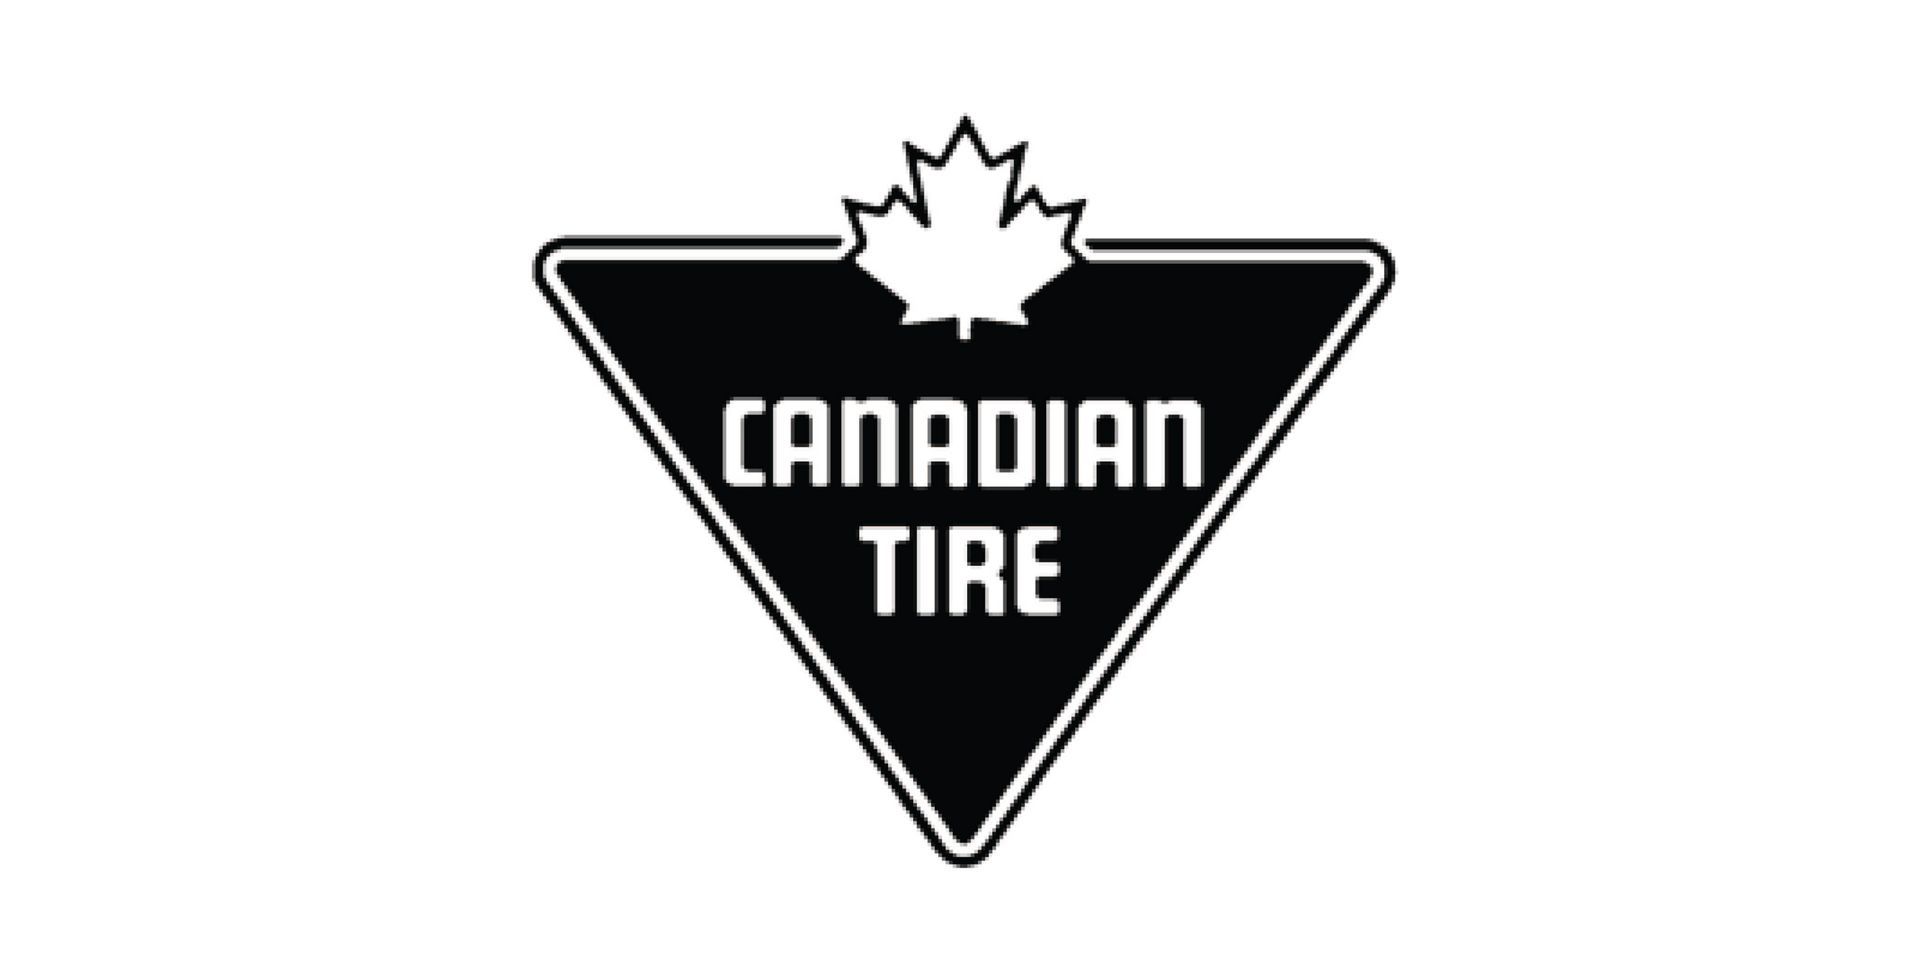 The logo for canadian tire has a maple leaf on it.